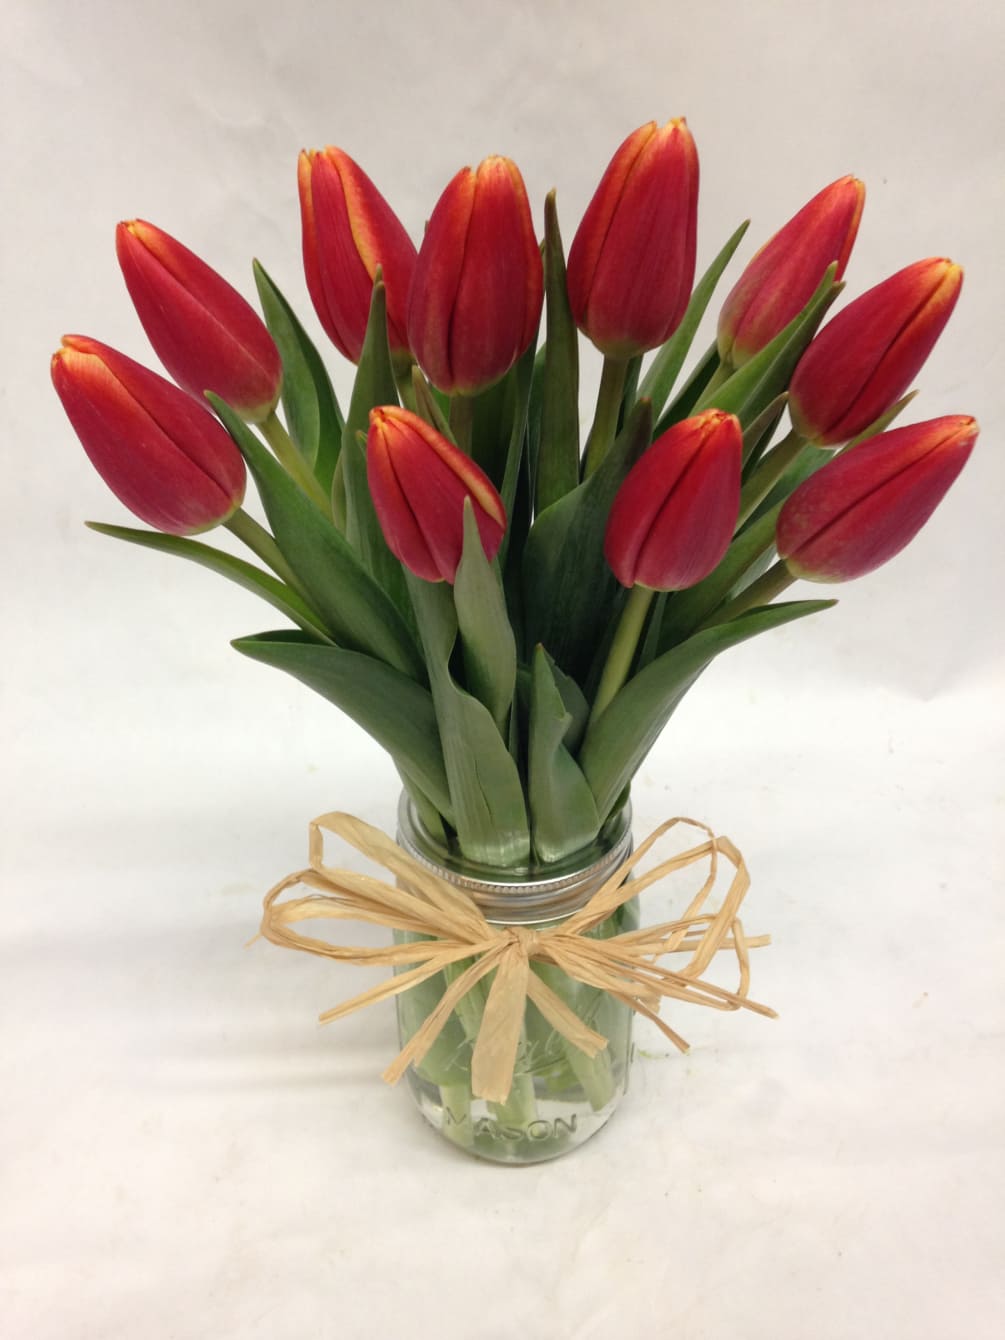 This sweet arrangement keeps things simple with a ten stem bunch of